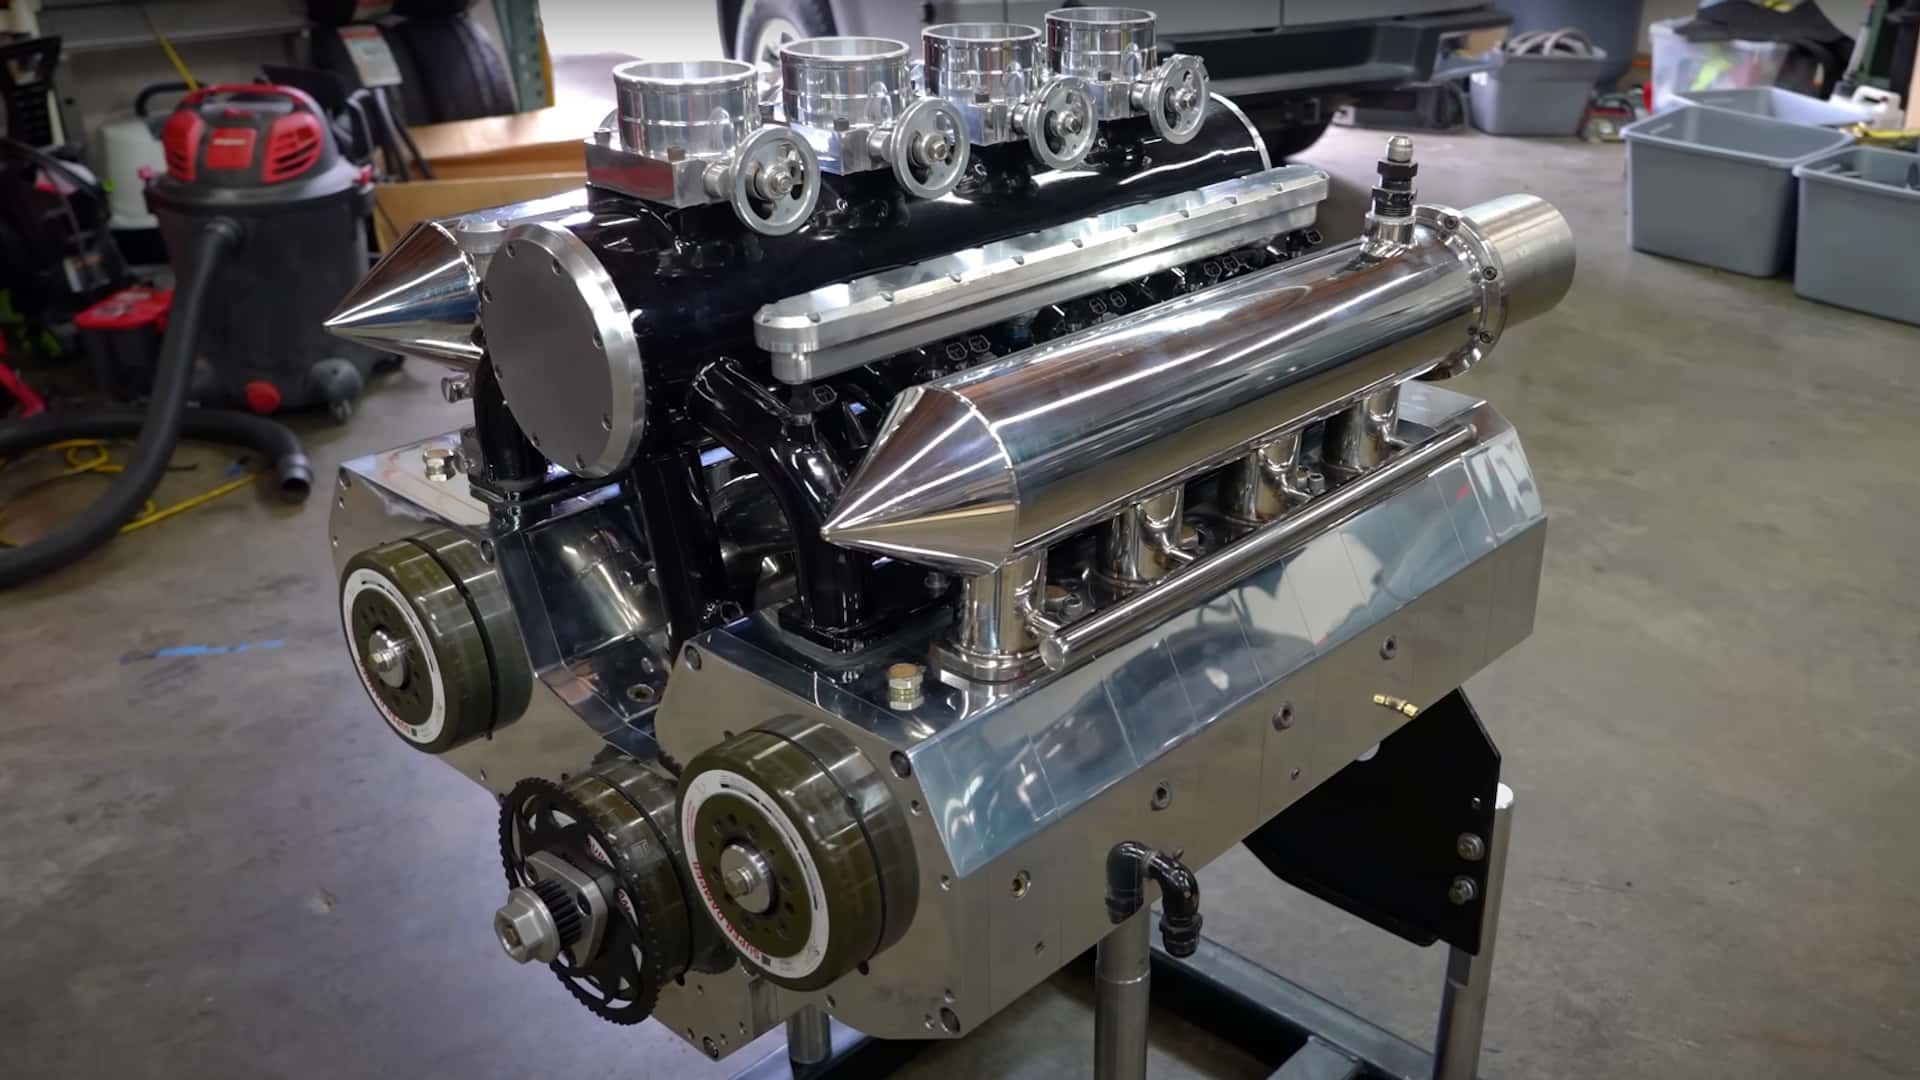 12-Rotor Wankel Engine Given To Rob Dahm